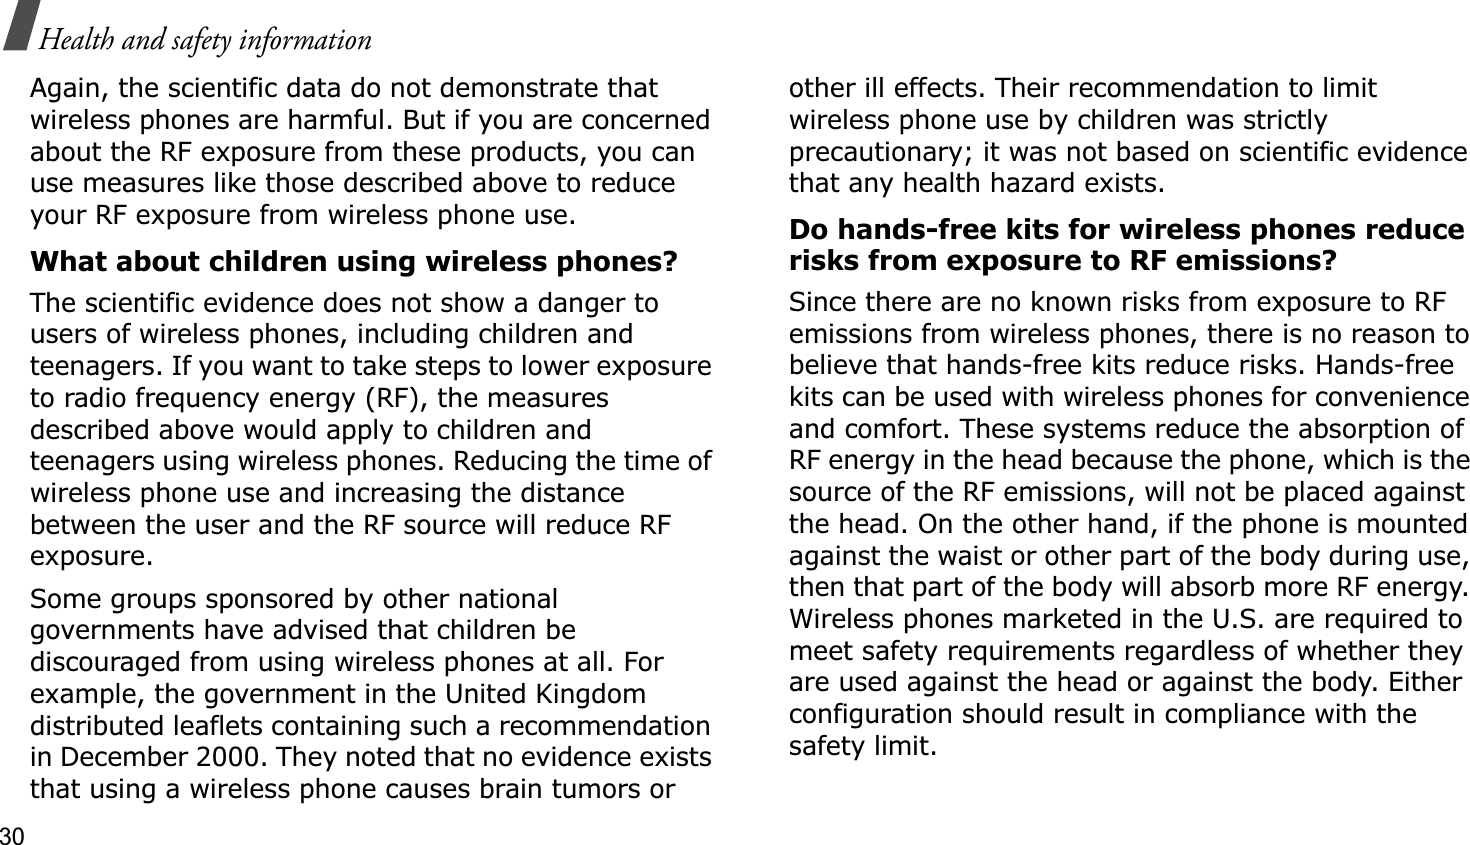 30Health and safety informationAgain, the scientific data do not demonstrate that wireless phones are harmful. But if you are concerned about the RF exposure from these products, you can use measures like those described above to reduce your RF exposure from wireless phone use.What about children using wireless phones?The scientific evidence does not show a danger to users of wireless phones, including children and teenagers. If you want to take steps to lower exposure to radio frequency energy (RF), the measures described above would apply to children and teenagers using wireless phones. Reducing the time of wireless phone use and increasing the distance between the user and the RF source will reduce RF exposure.Some groups sponsored by other national governments have advised that children be discouraged from using wireless phones at all. For example, the government in the United Kingdom distributed leaflets containing such a recommendation in December 2000. They noted that no evidence exists that using a wireless phone causes brain tumors or other ill effects. Their recommendation to limit wireless phone use by children was strictly precautionary; it was not based on scientific evidence that any health hazard exists. Do hands-free kits for wireless phones reduce risks from exposure to RF emissions?Since there are no known risks from exposure to RF emissions from wireless phones, there is no reason to believe that hands-free kits reduce risks. Hands-free kits can be used with wireless phones for convenience and comfort. These systems reduce the absorption of RF energy in the head because the phone, which is the source of the RF emissions, will not be placed against the head. On the other hand, if the phone is mounted against the waist or other part of the body during use, then that part of the body will absorb more RF energy. Wireless phones marketed in the U.S. are required to meet safety requirements regardless of whether they are used against the head or against the body. Either configuration should result in compliance with the safety limit.